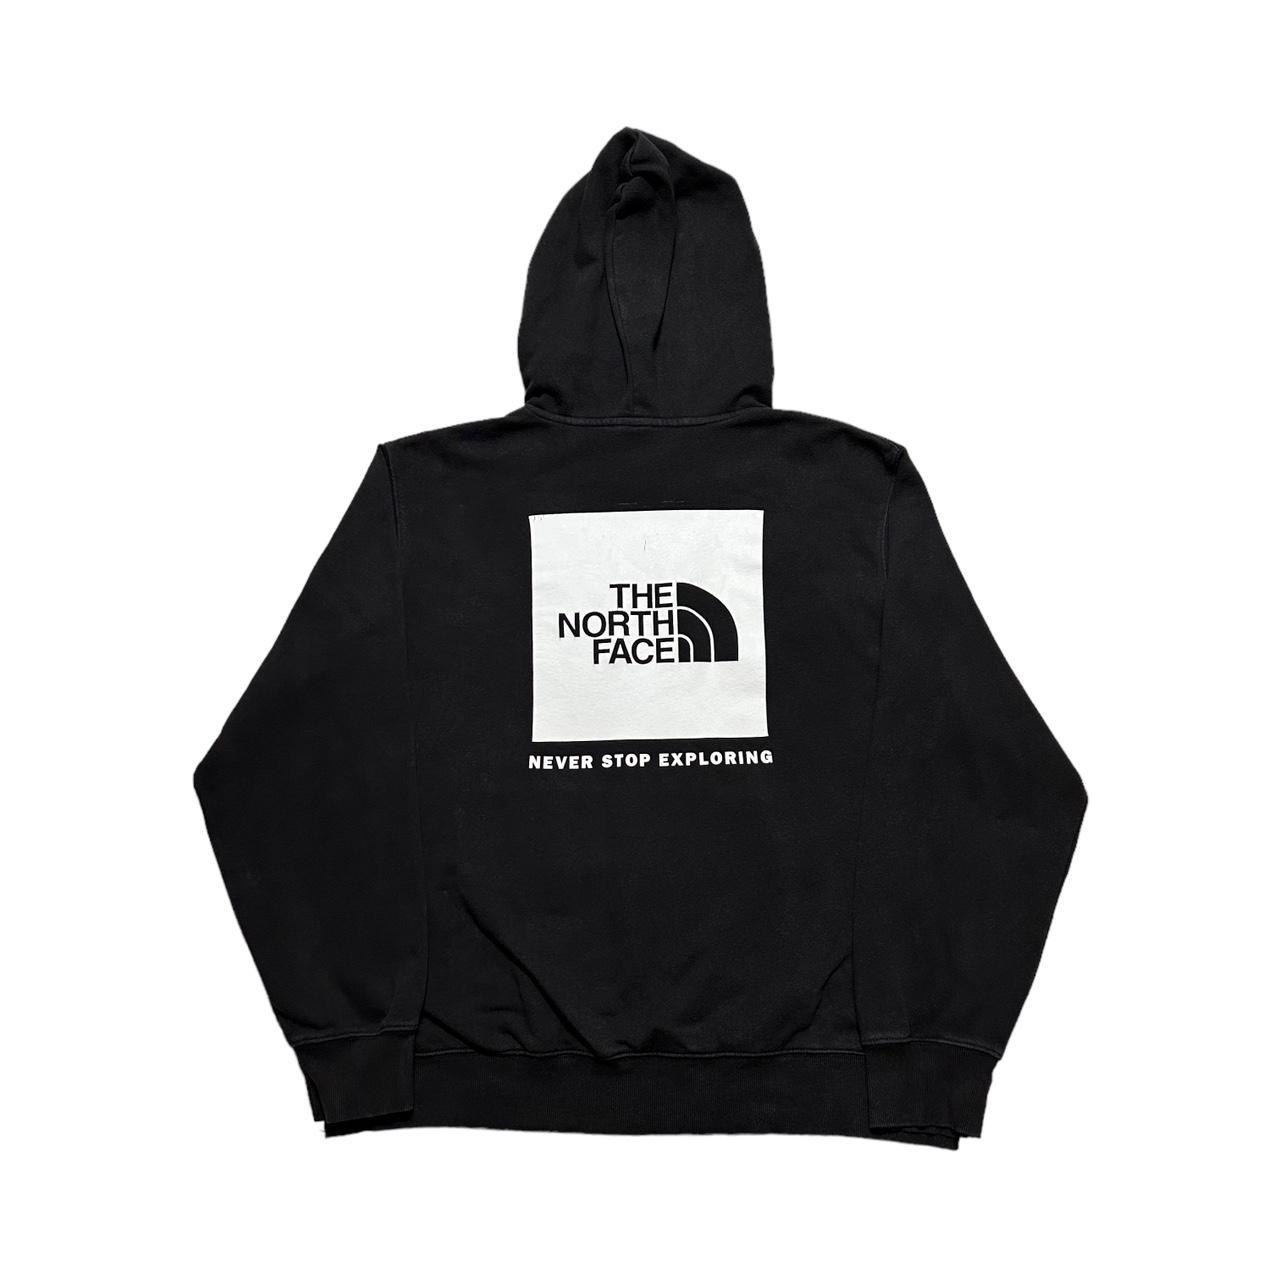 The North Face Men's Black and White Hoodie | Depop